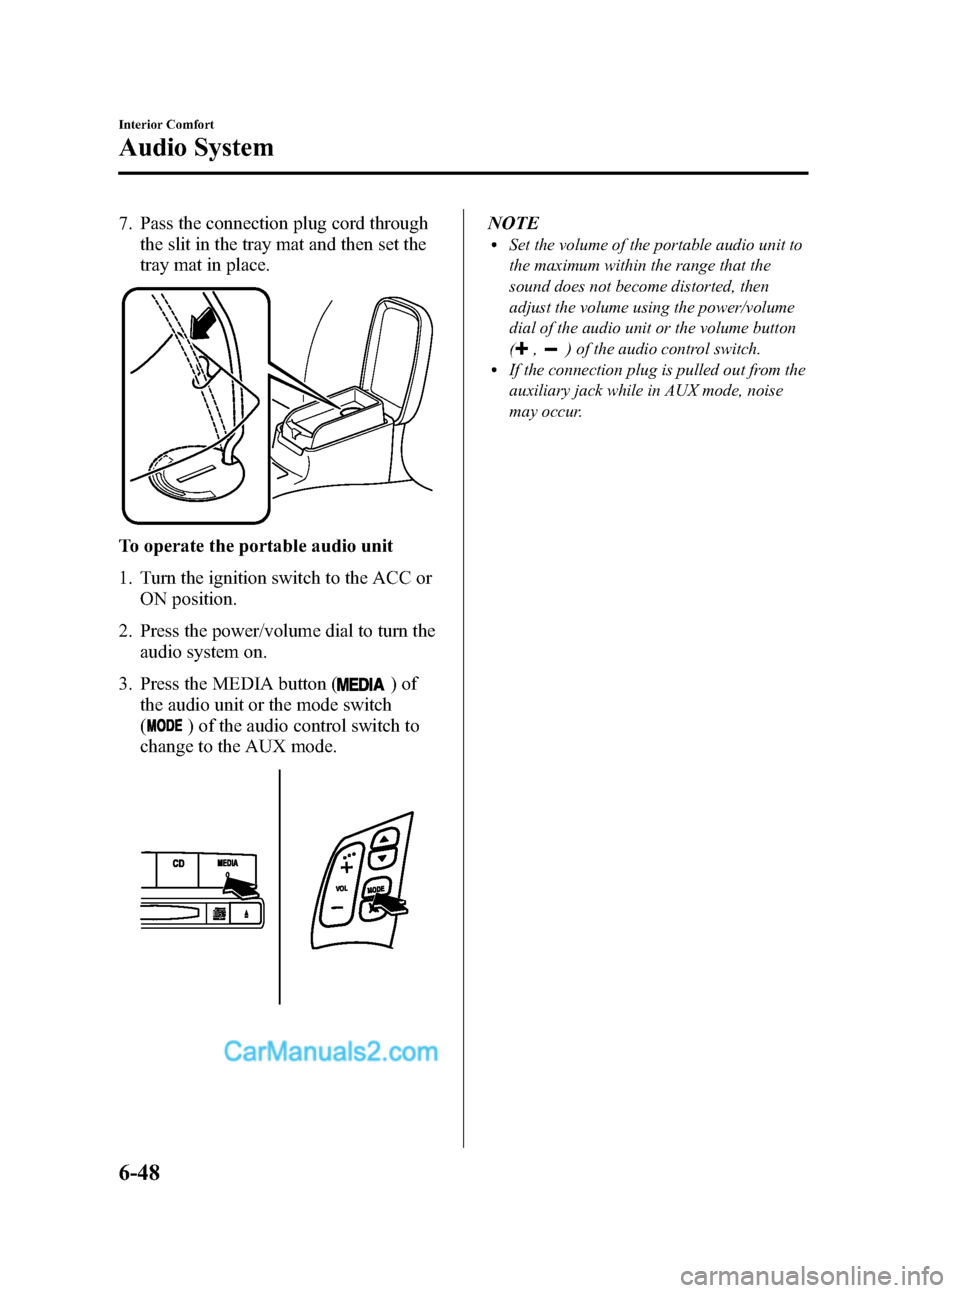 MAZDA MODEL MAZDASPEED 3 2008  Owners Manual (in English) Black plate (226,1)
7. Pass the connection plug cord through
the slit in the tray mat and then set the
tray mat in place.
To operate the portable audio unit
1. Turn the ignition switch to the ACC or
O